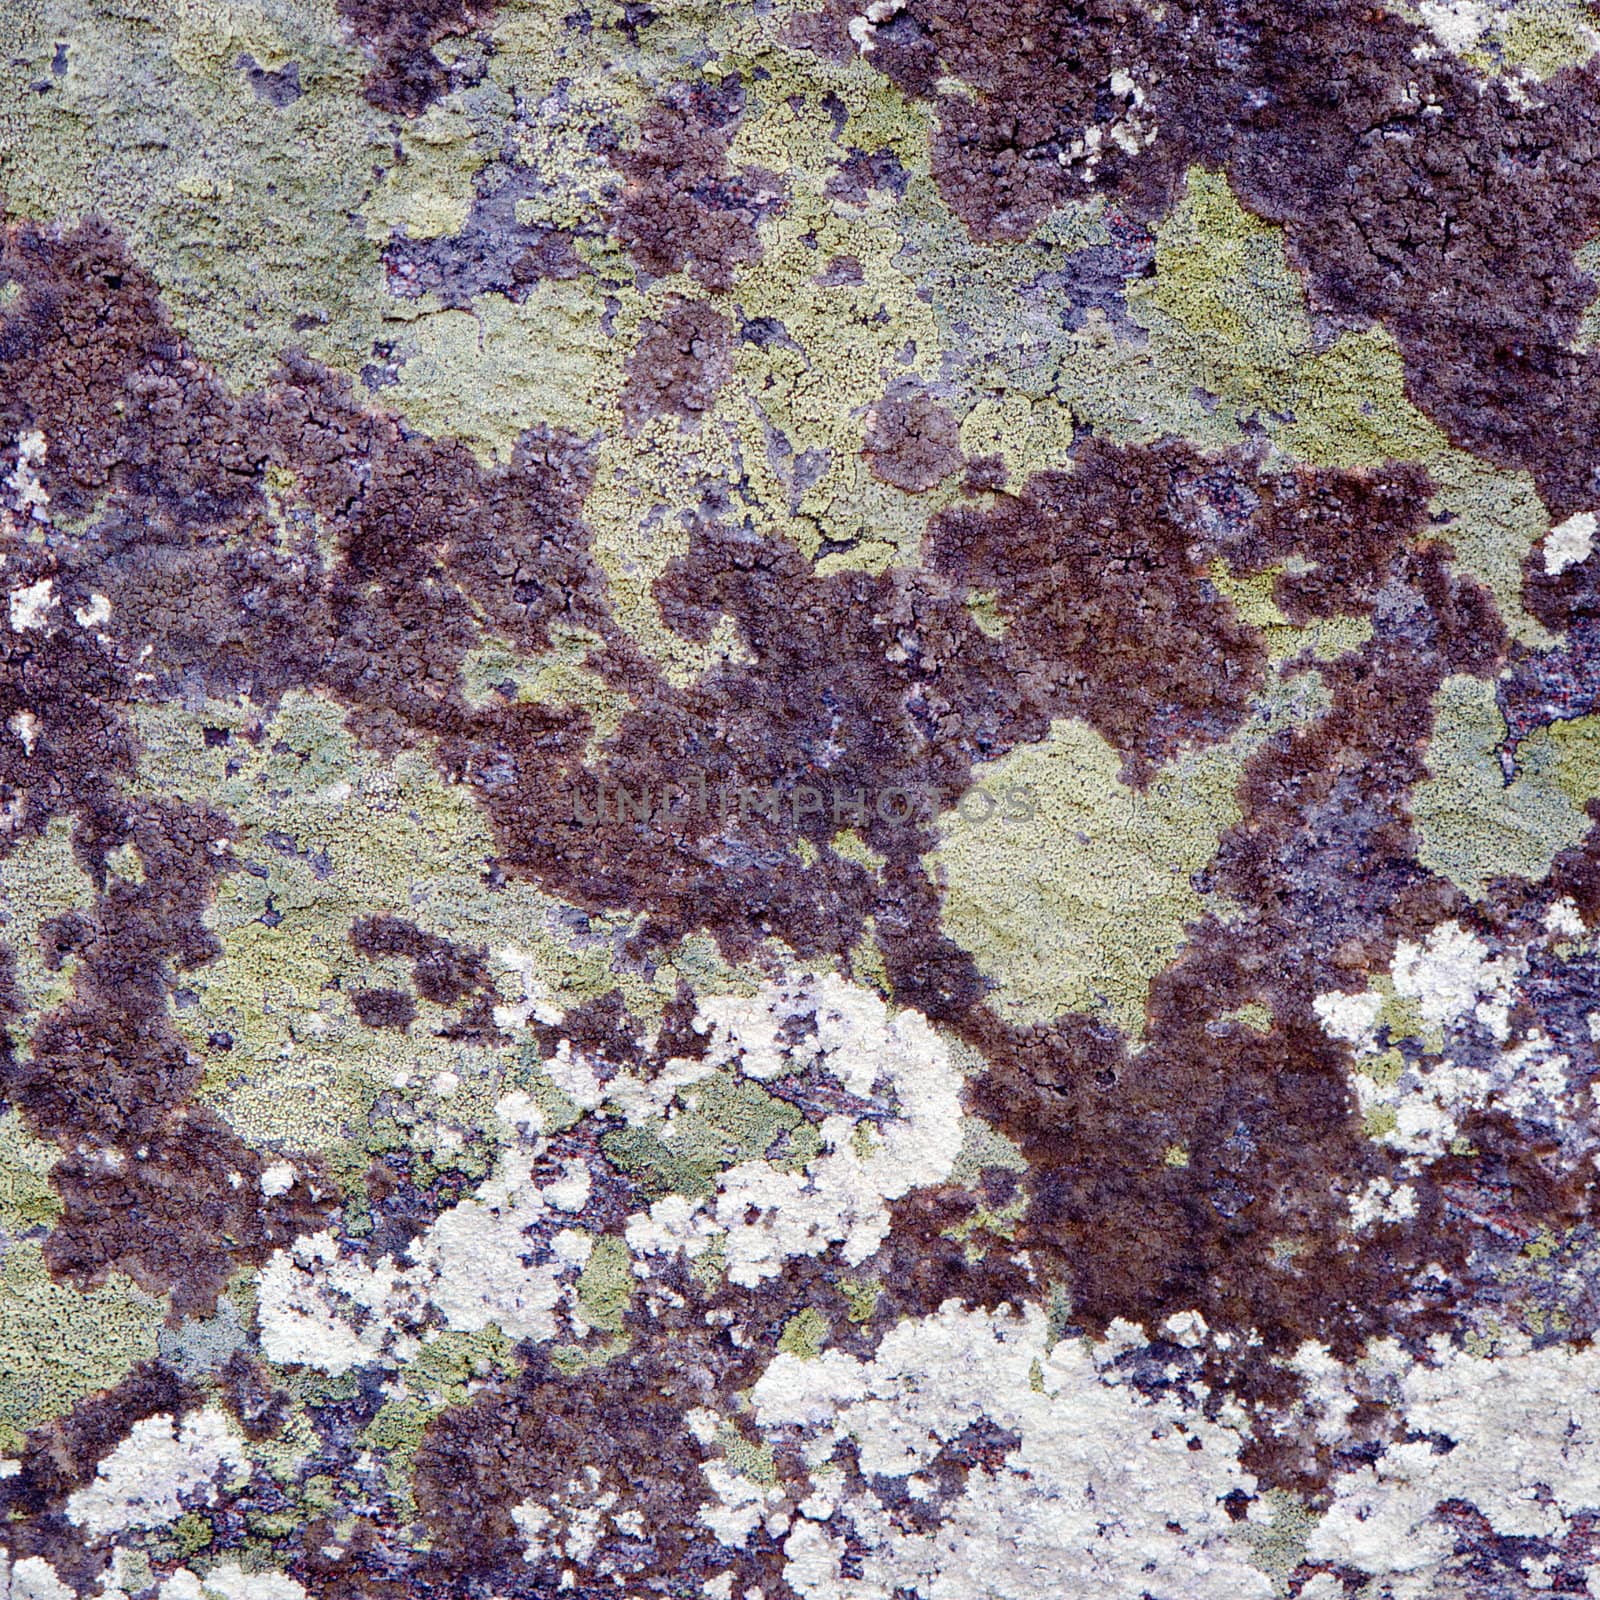 The surface of a rock covered by a lichen